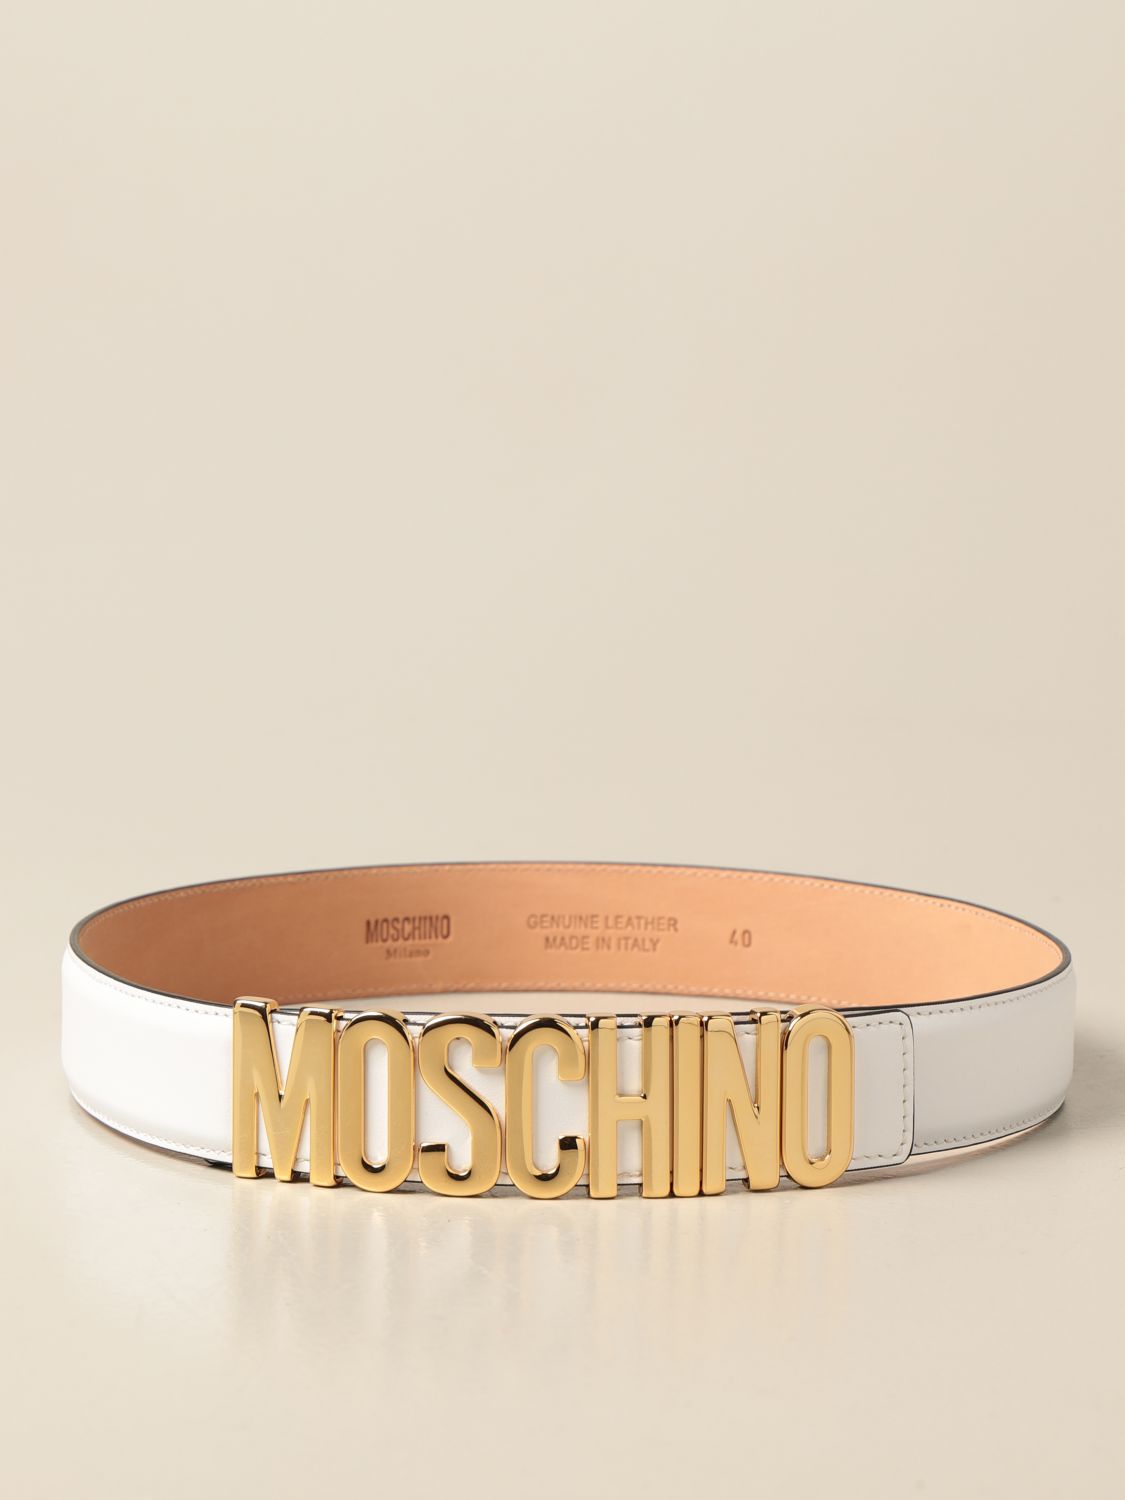 BOUTIQUE MOSCHINO: Moschino Boutique leather belt with lettering buckle ...